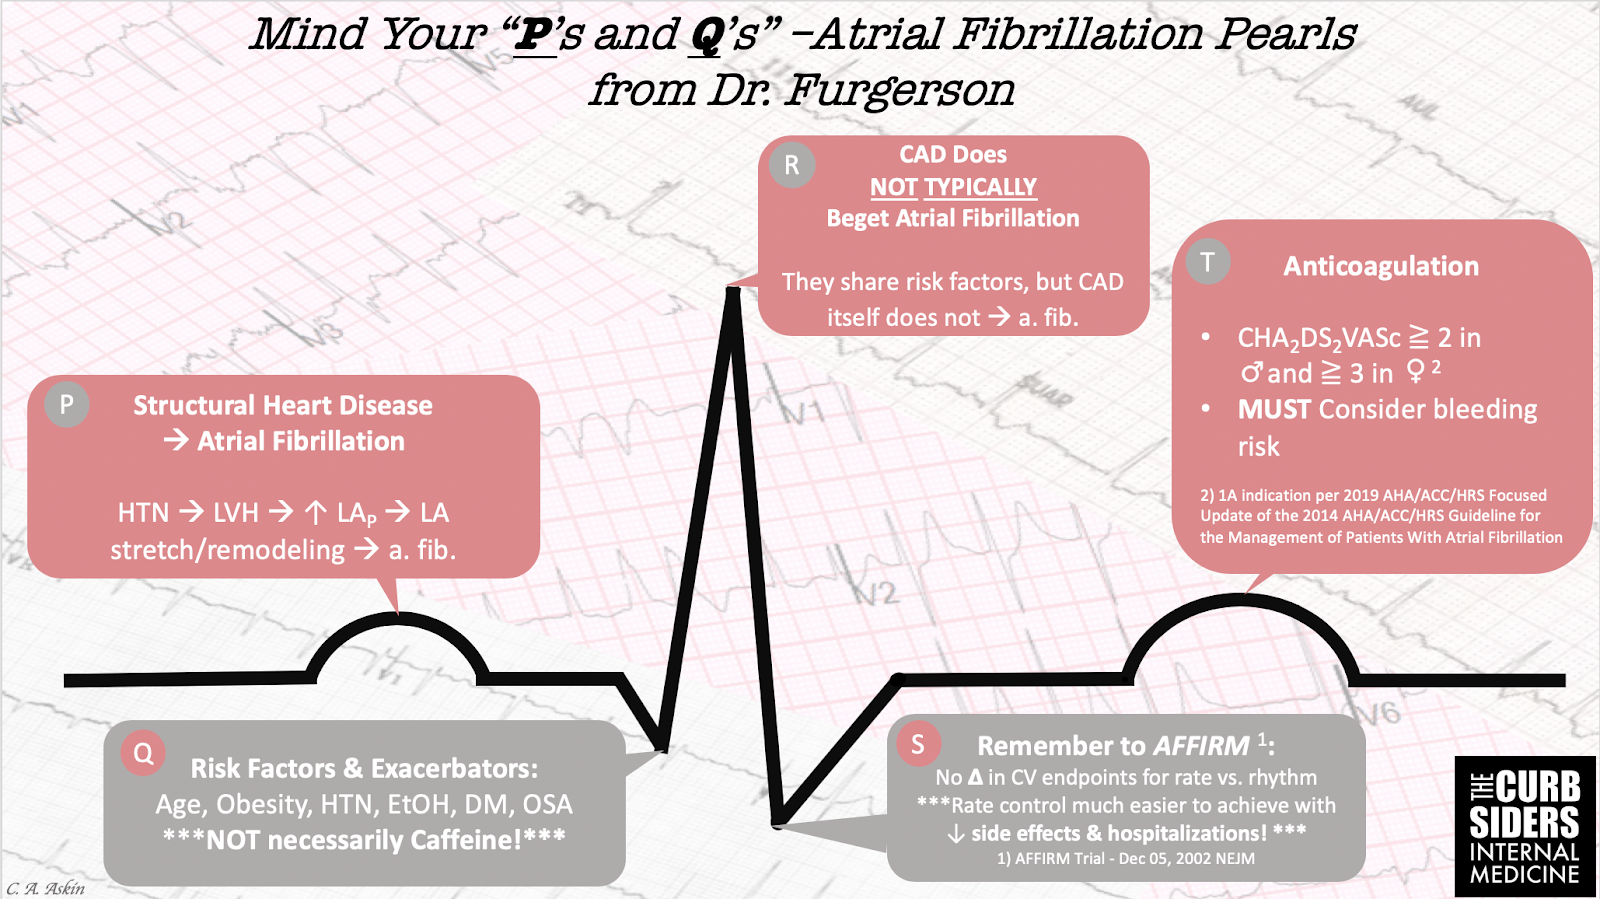 Mind Your Ps and Qs. Some atrial fibrillation pearls from our conversation with Dr James Furgerson MD. Graphic by Cyrus Askin MD